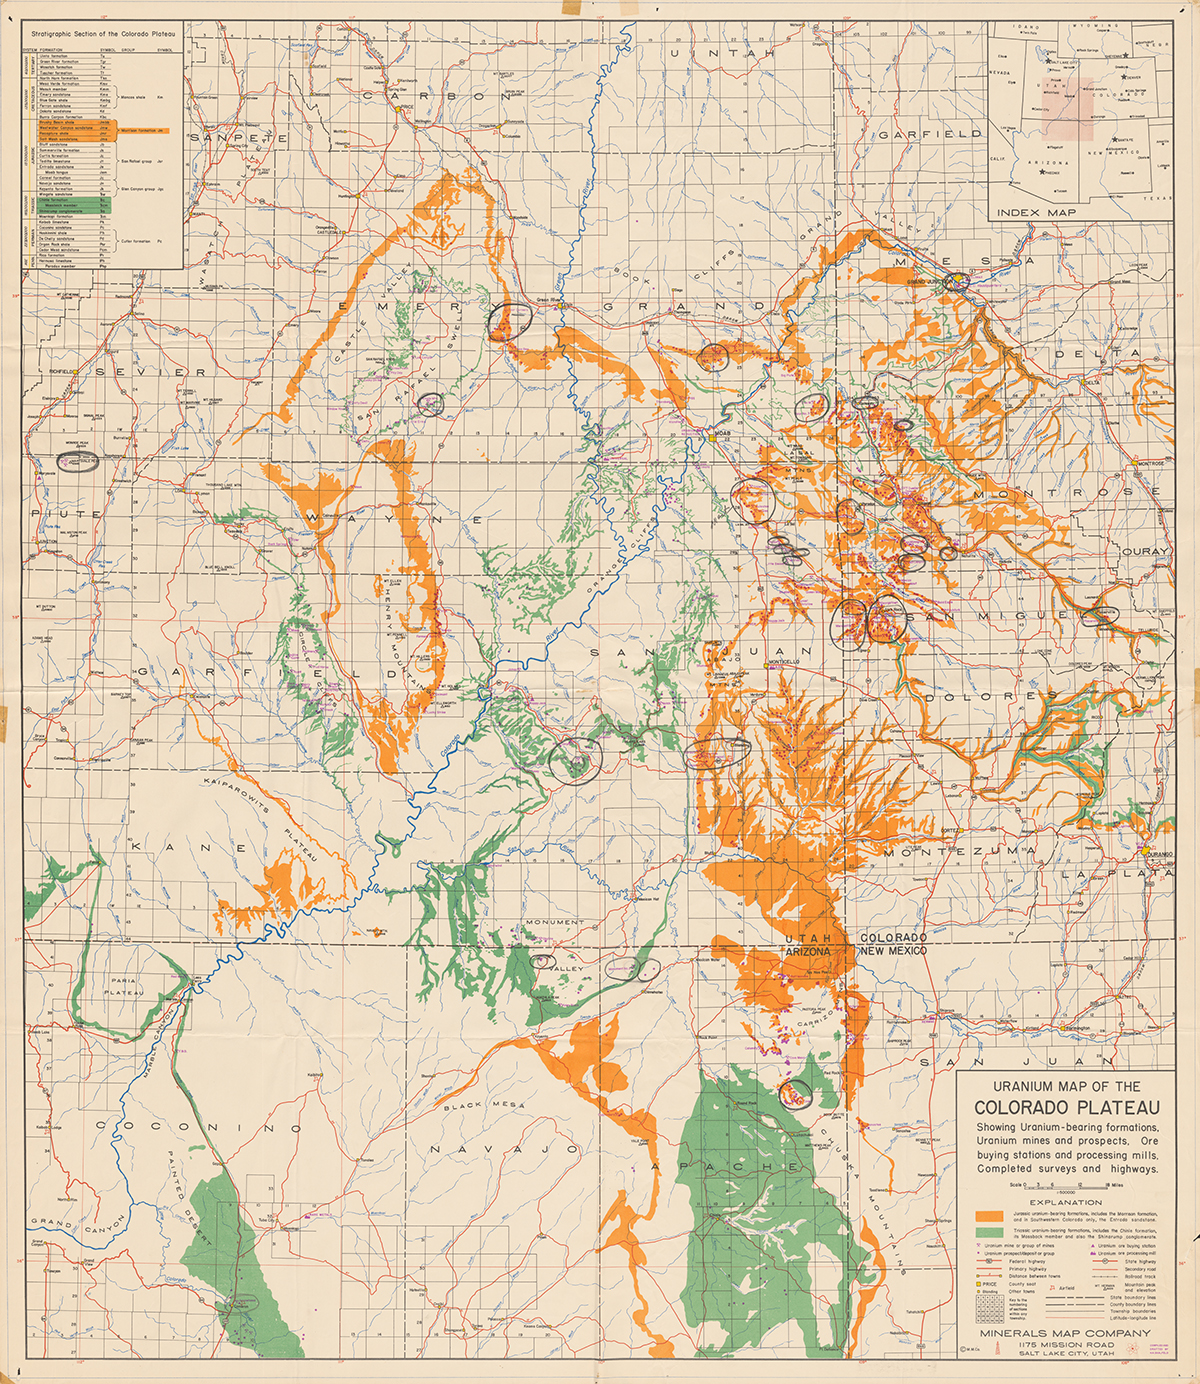 A green and orange map of the Colorado Plateau, United States.